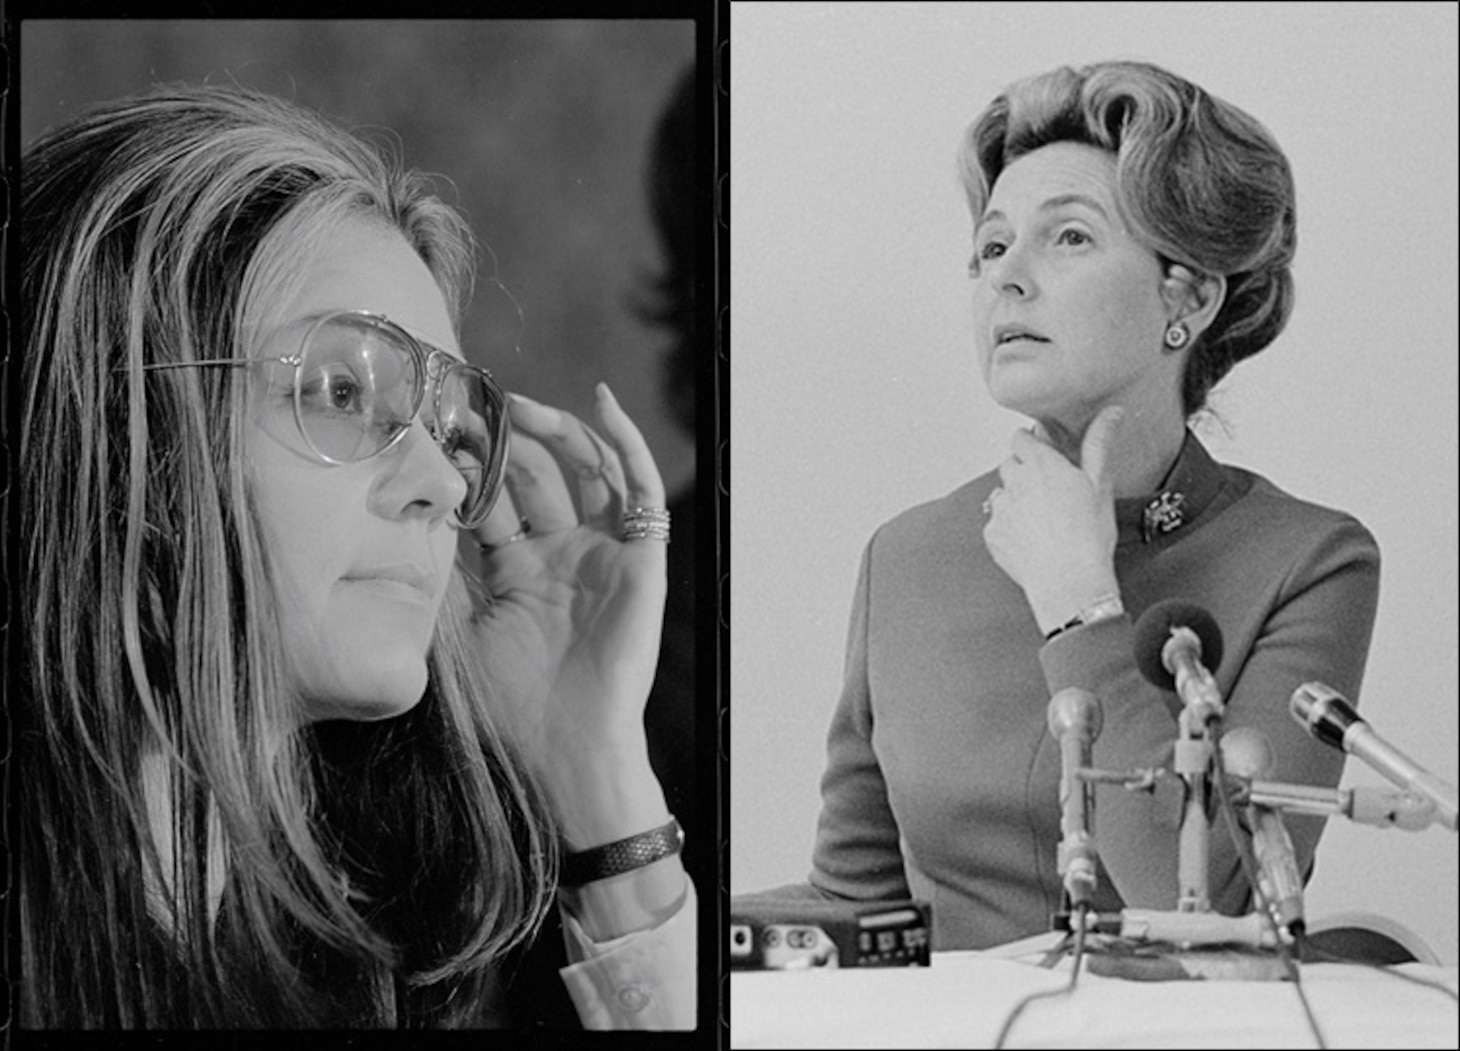 Gloria Steinem (left) at a Women’s Action Alliance news conference in 1972. Phyllis Schlafly (right) takes questions in Washington, DC in 1976. (Images courtesy Library of Congress)